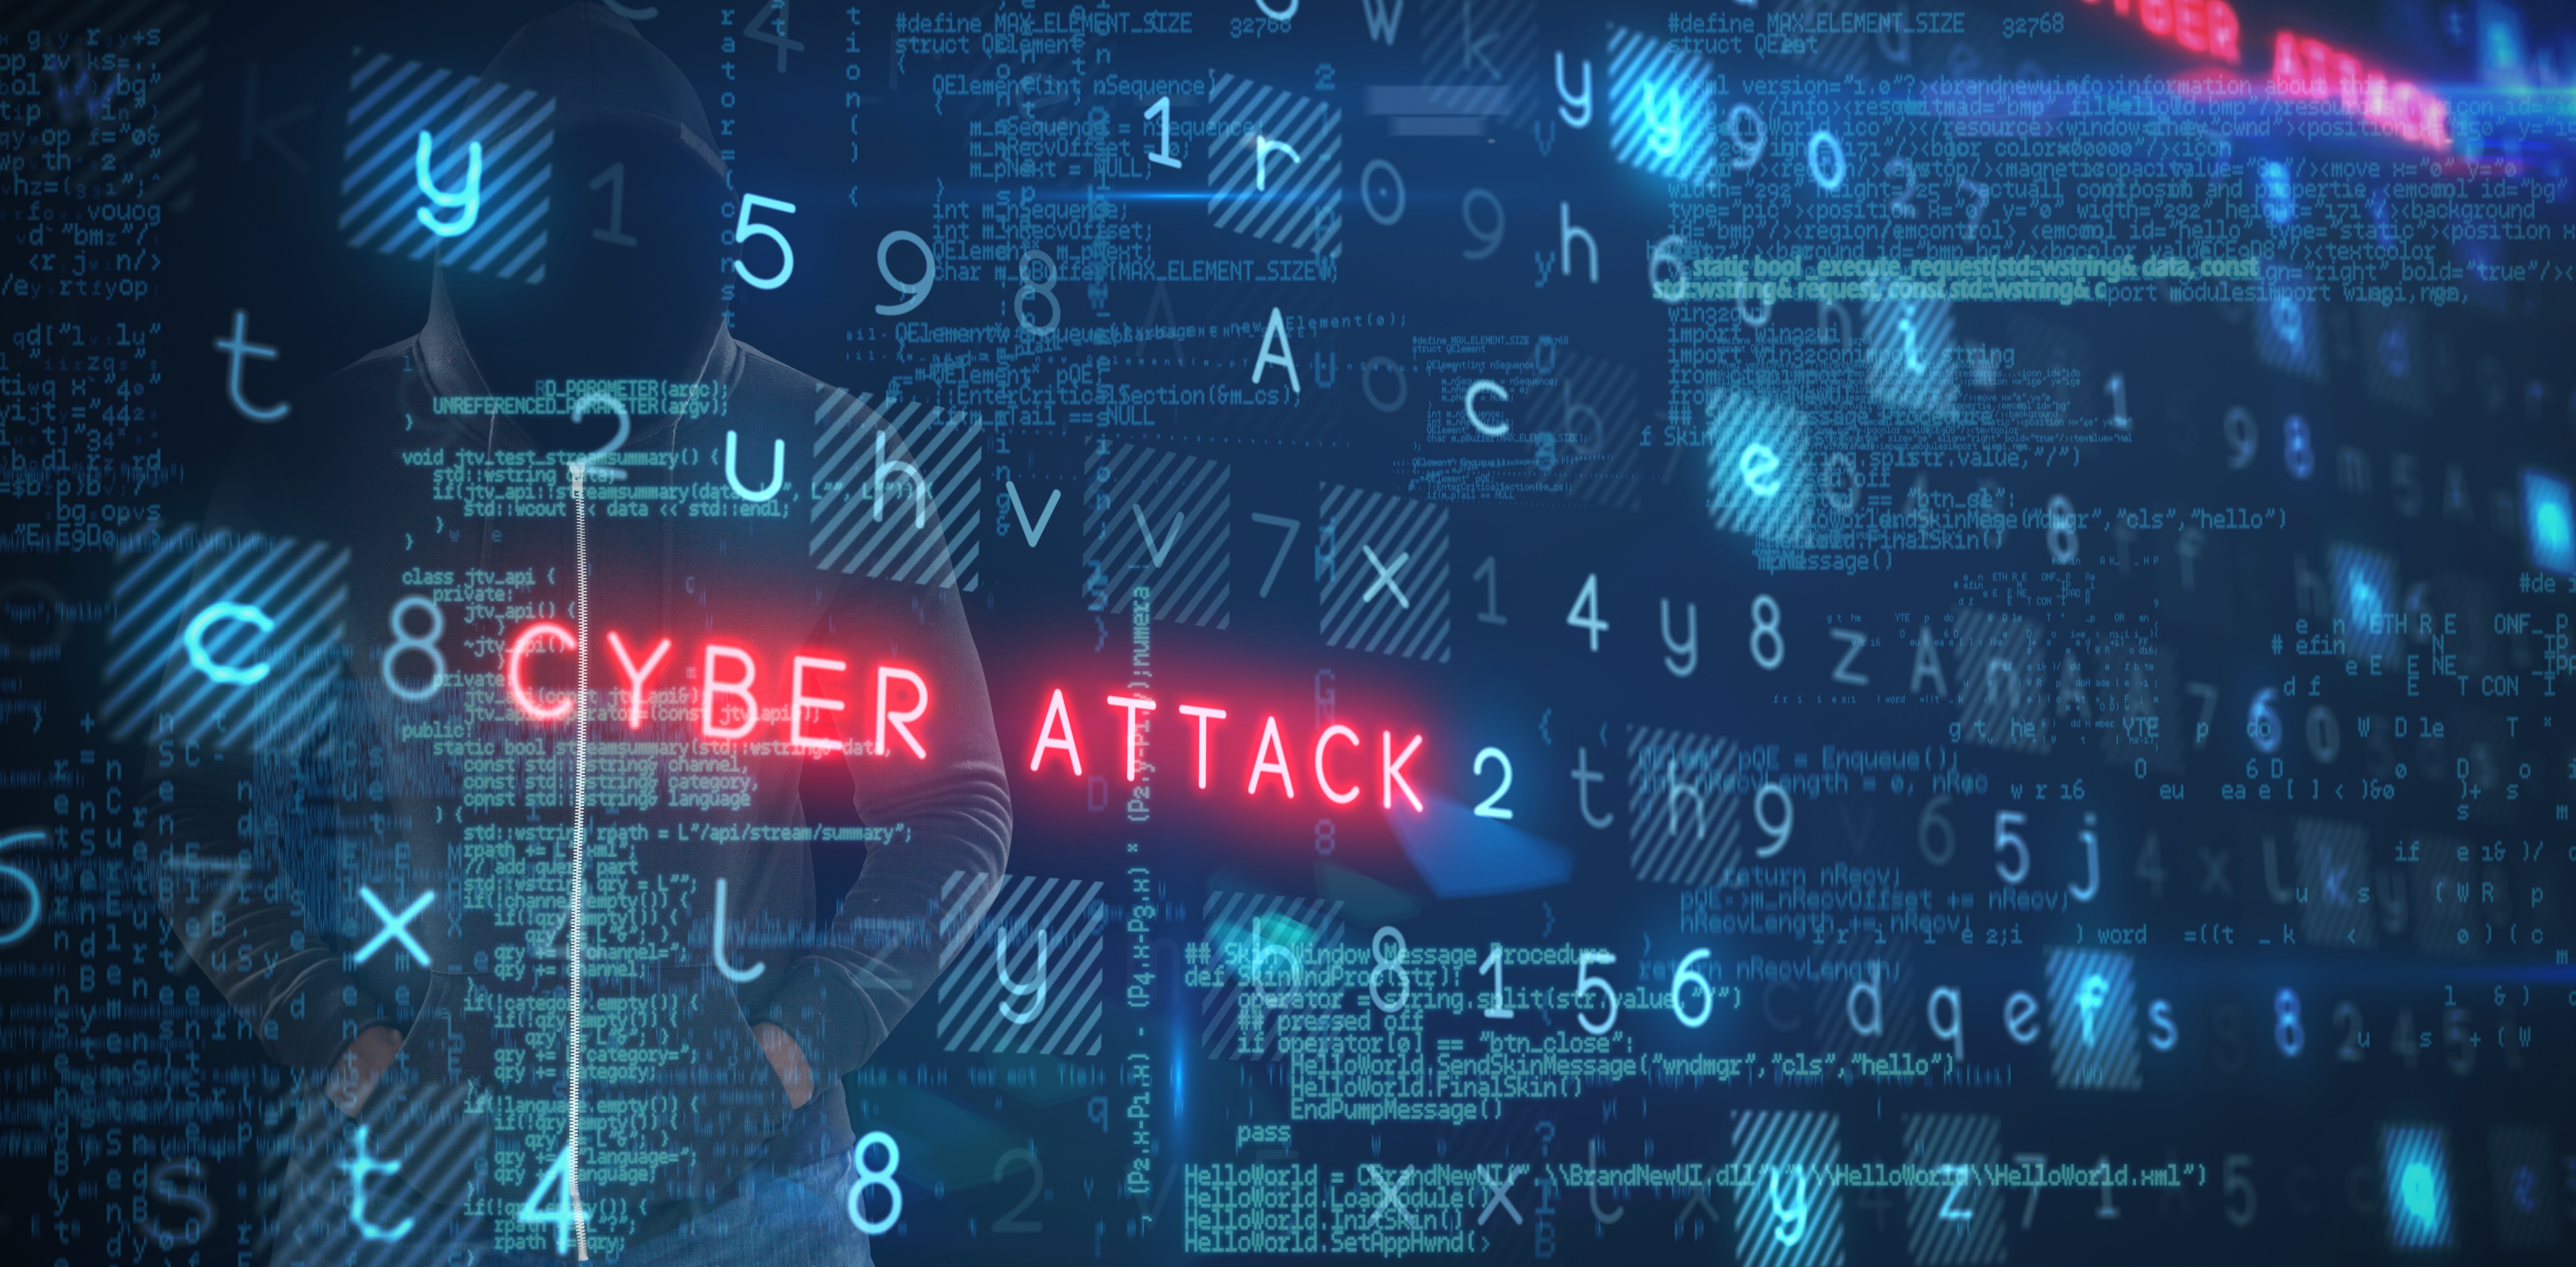 Read full post: Cybersecurity Best Practice in Times of Increased Threat